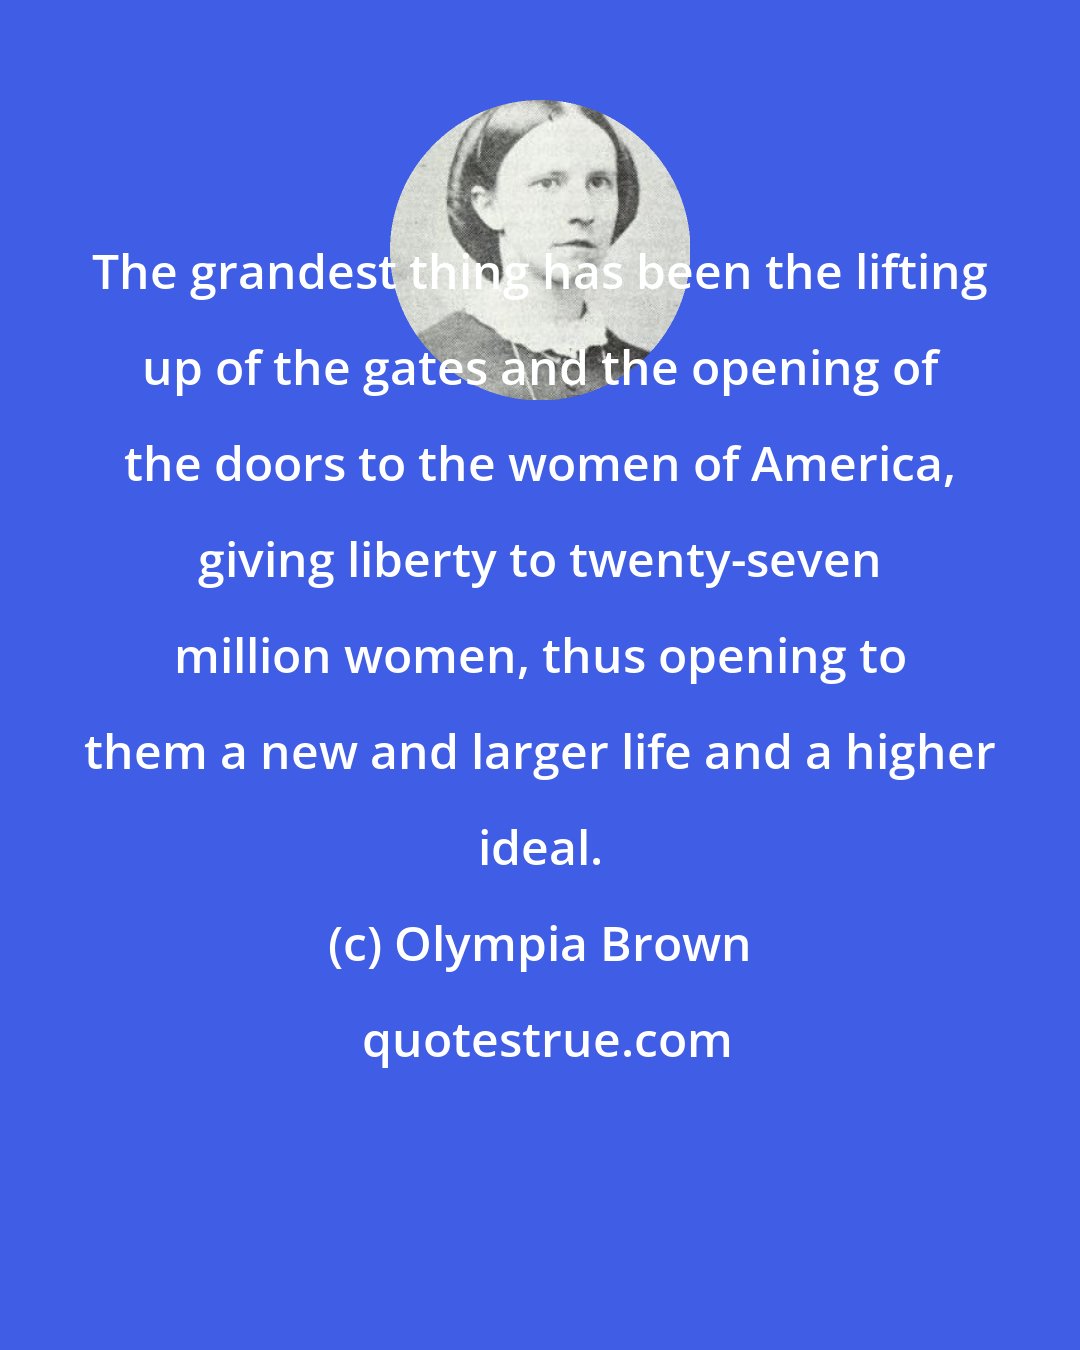 Olympia Brown: The grandest thing has been the lifting up of the gates and the opening of the doors to the women of America, giving liberty to twenty-seven million women, thus opening to them a new and larger life and a higher ideal.